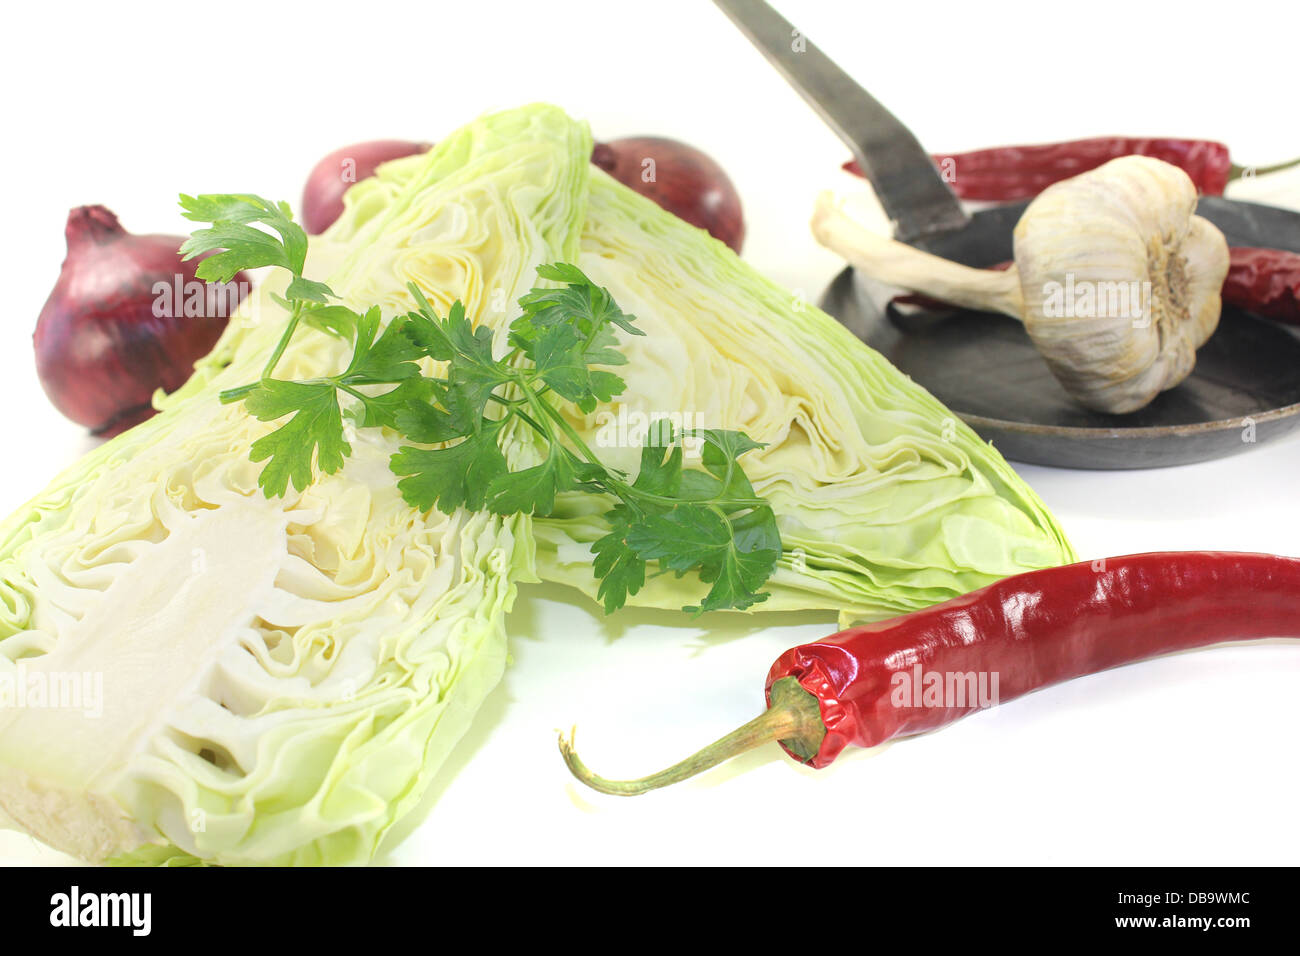 sweetheart cabbage with parsley and onions on a light background Stock Photo